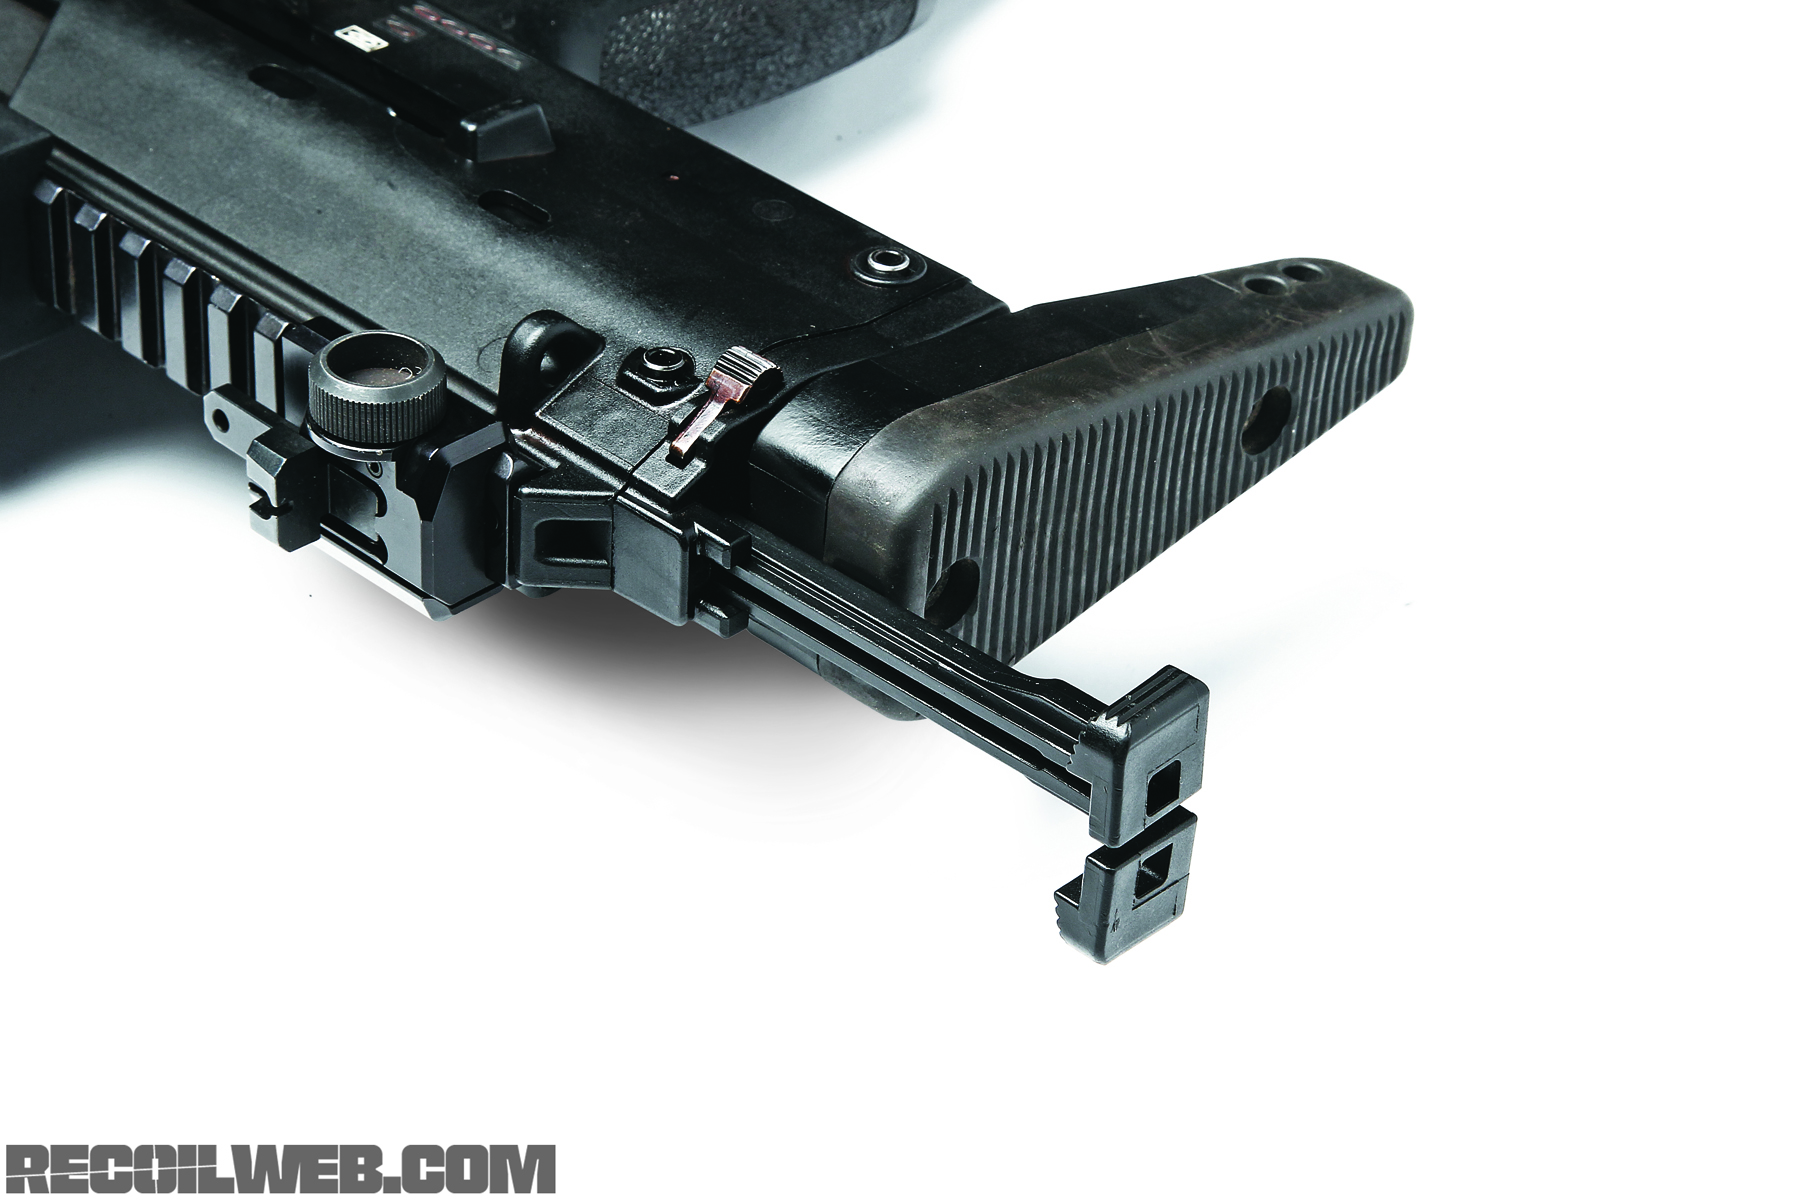 HK MP7A1 Charging Handle 15719 on September 5, 2012 for Recoil. 